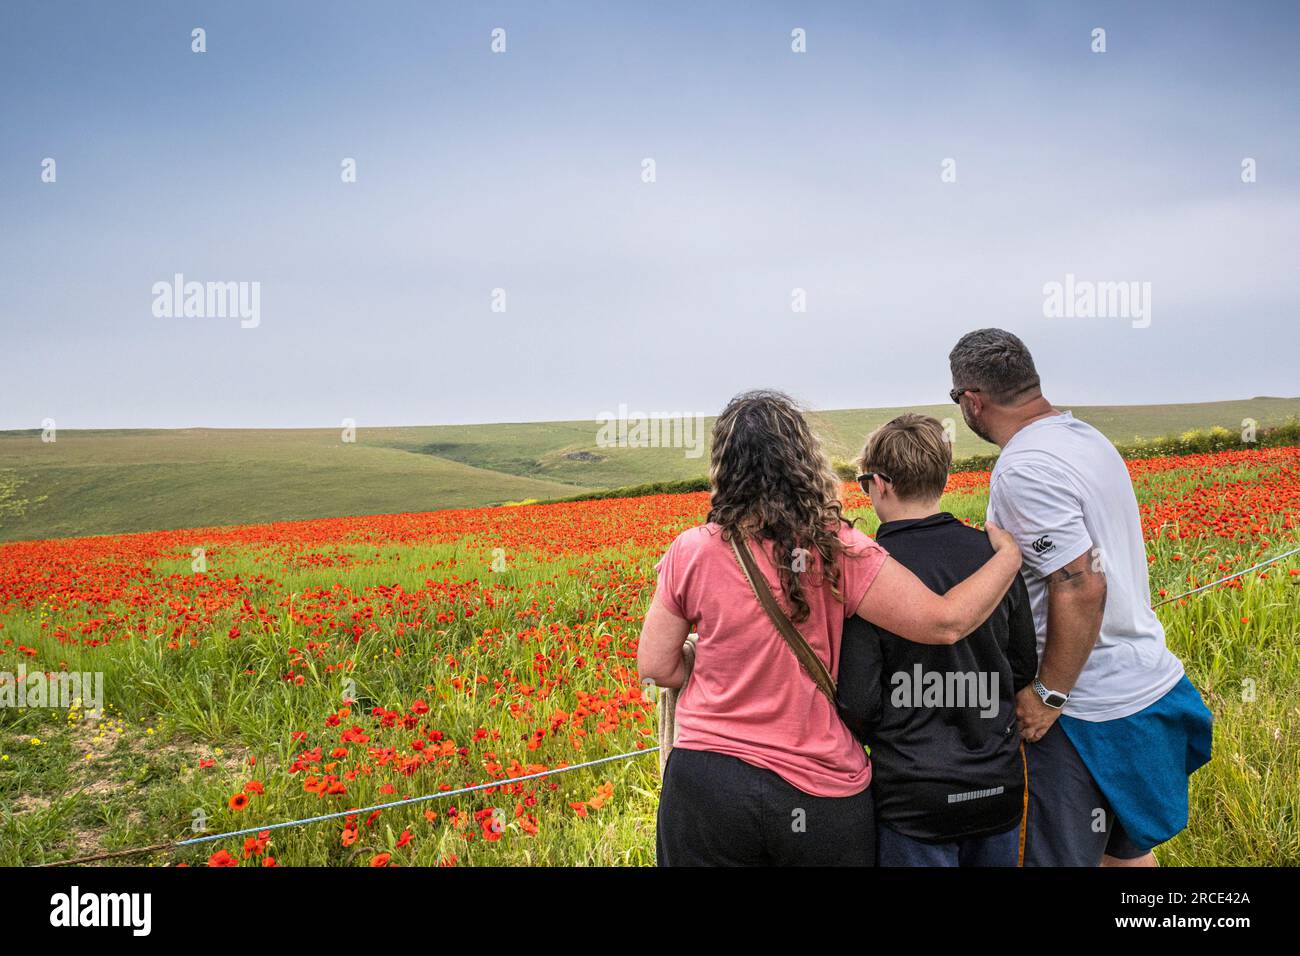 A family of holidaymakers enjoying the stunning sight a field full of Common Poppies Papaver rhoeas on the coast of Crantock Bay in Newquay in Cornwal Stock Photo